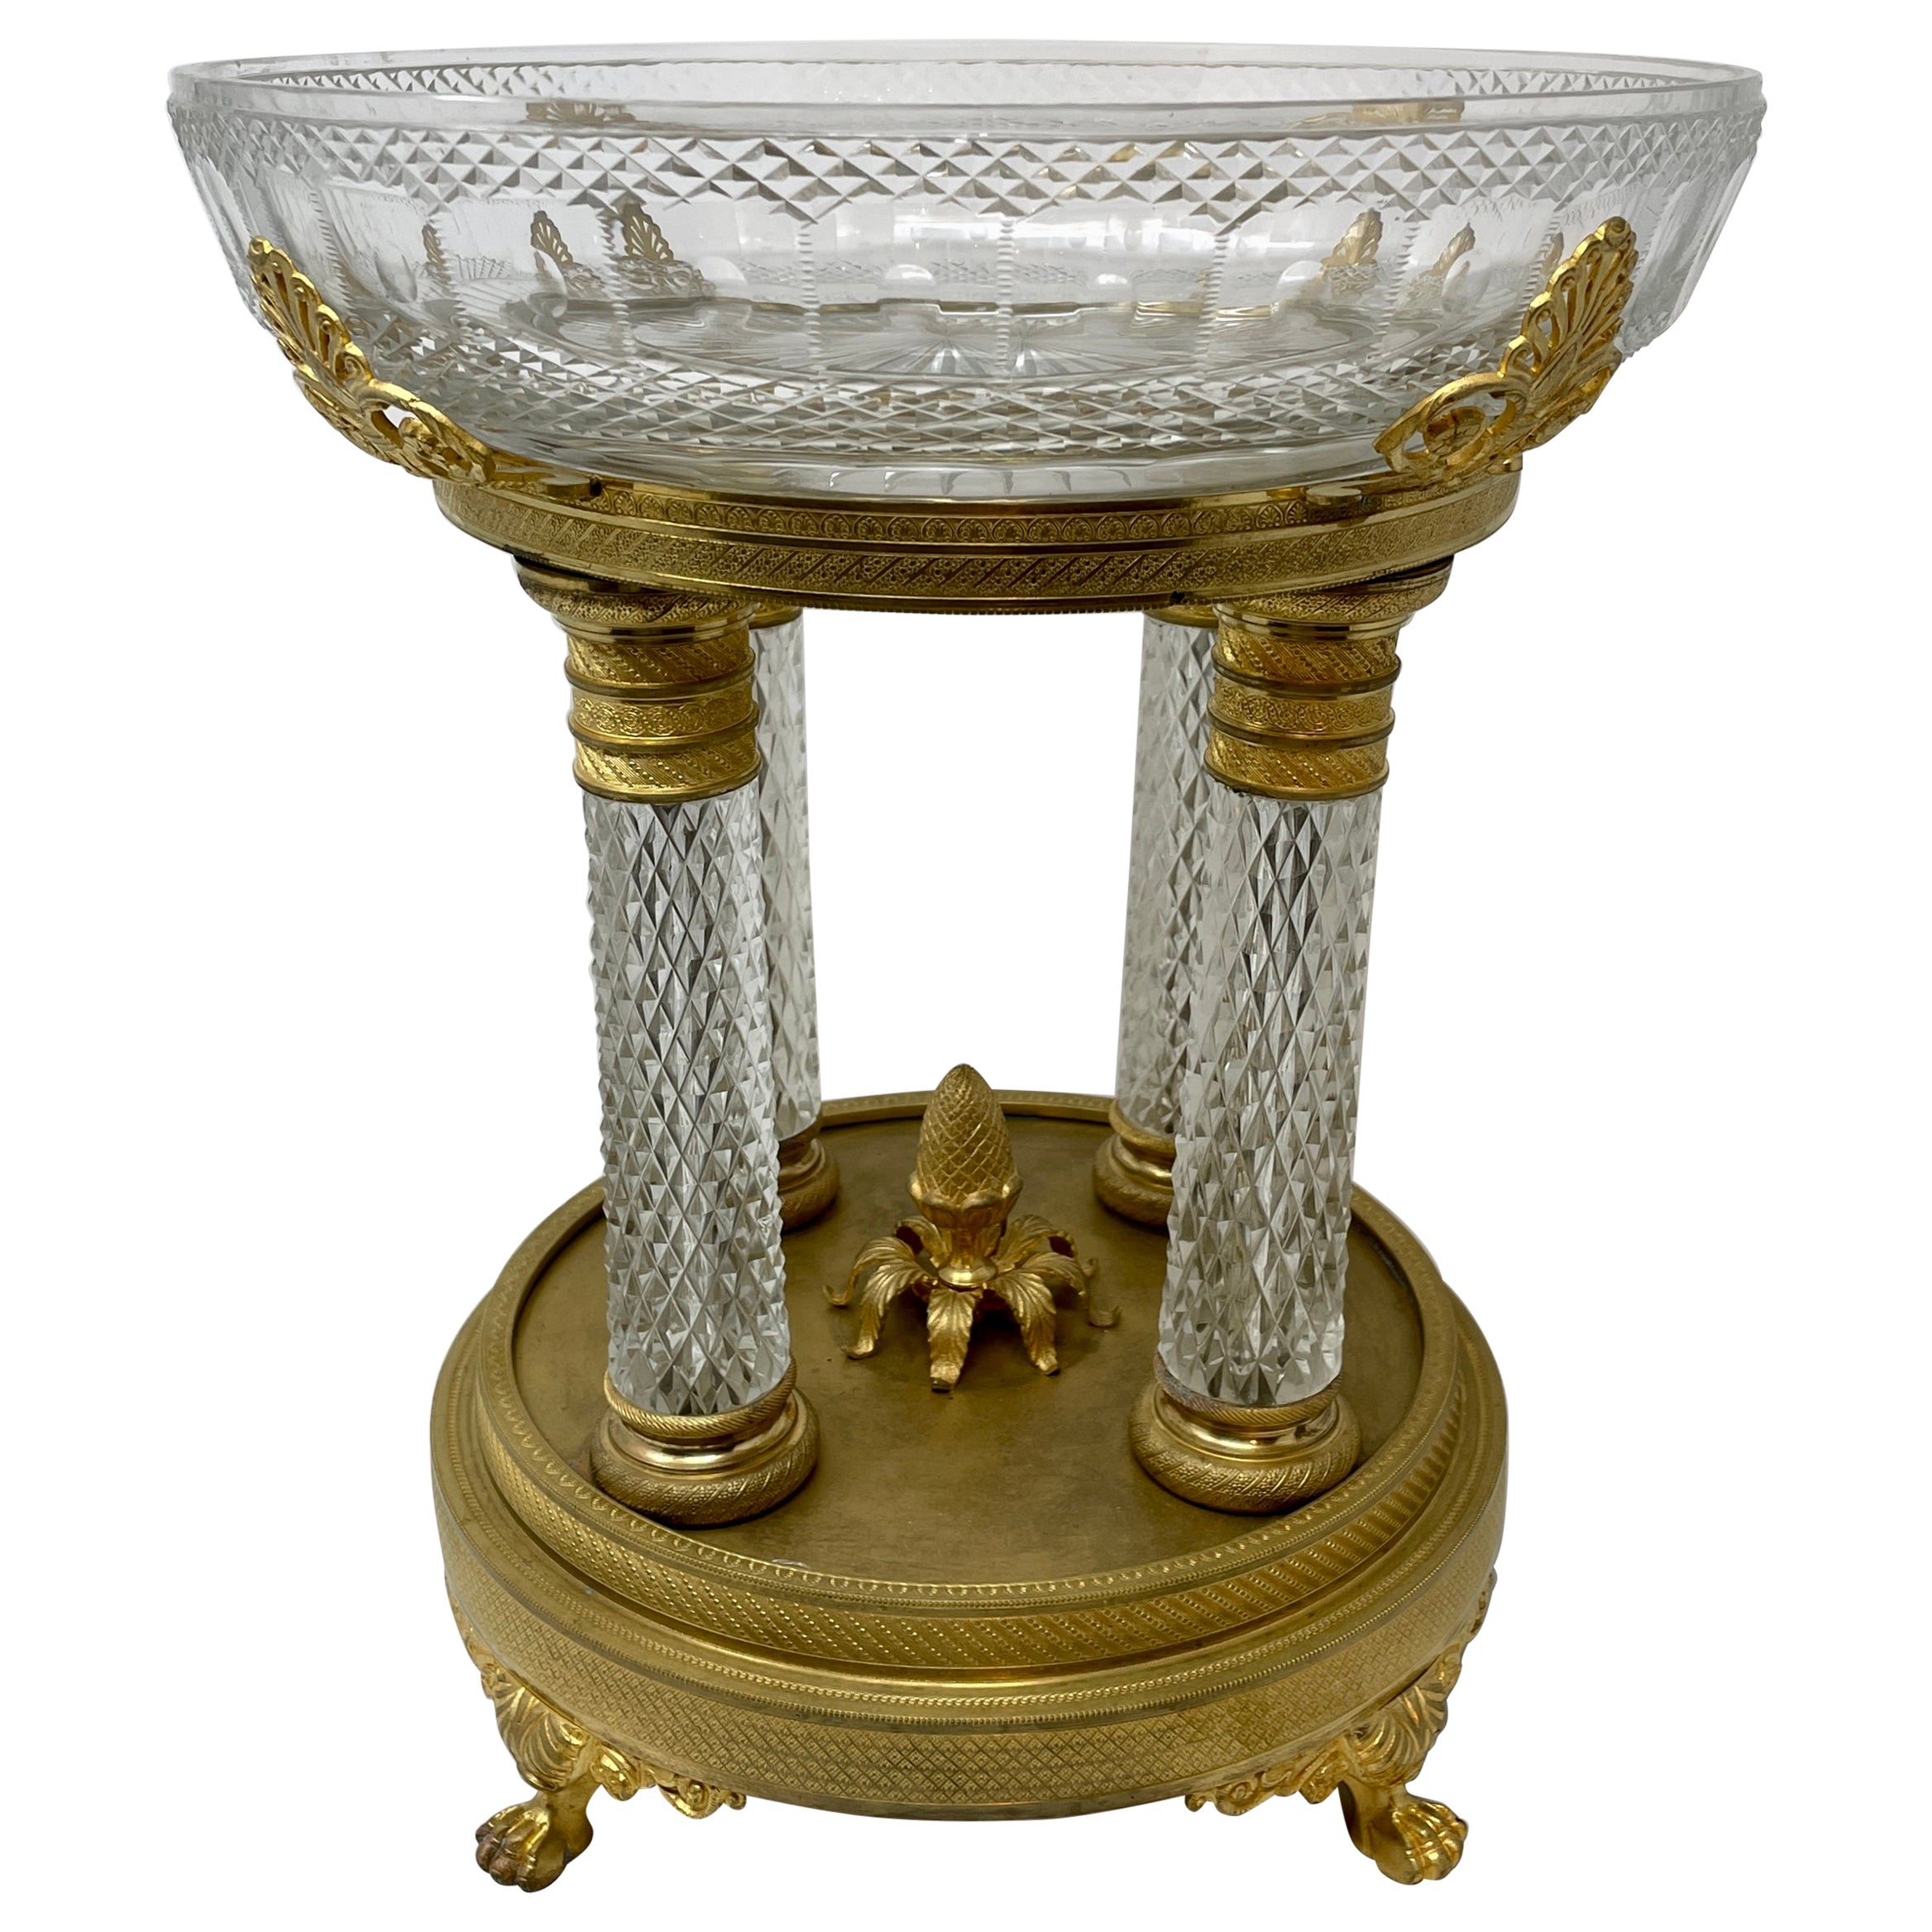 Antique French Baccarat Crystal and Bronze D' Ore Centerpiece, circa 1890